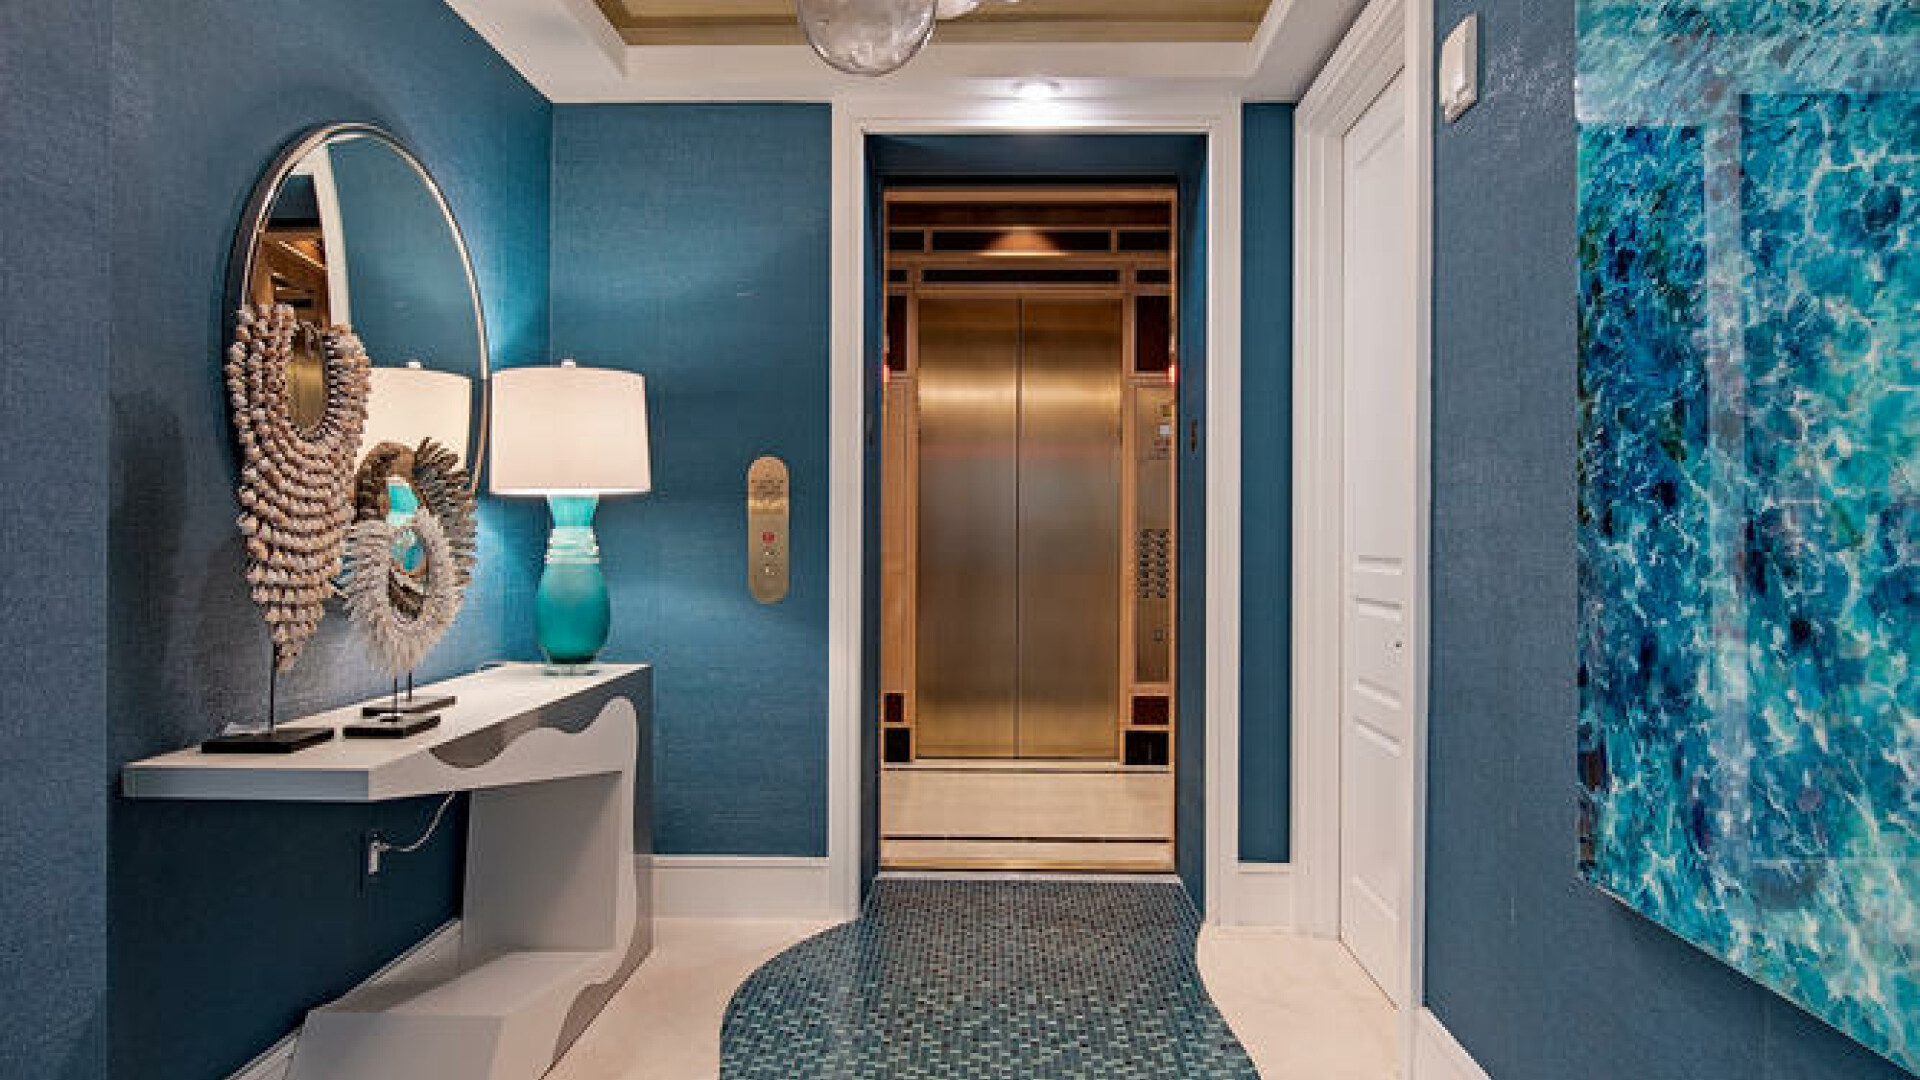 Custom entryway lined with aqua-colored tiles, Naples FL